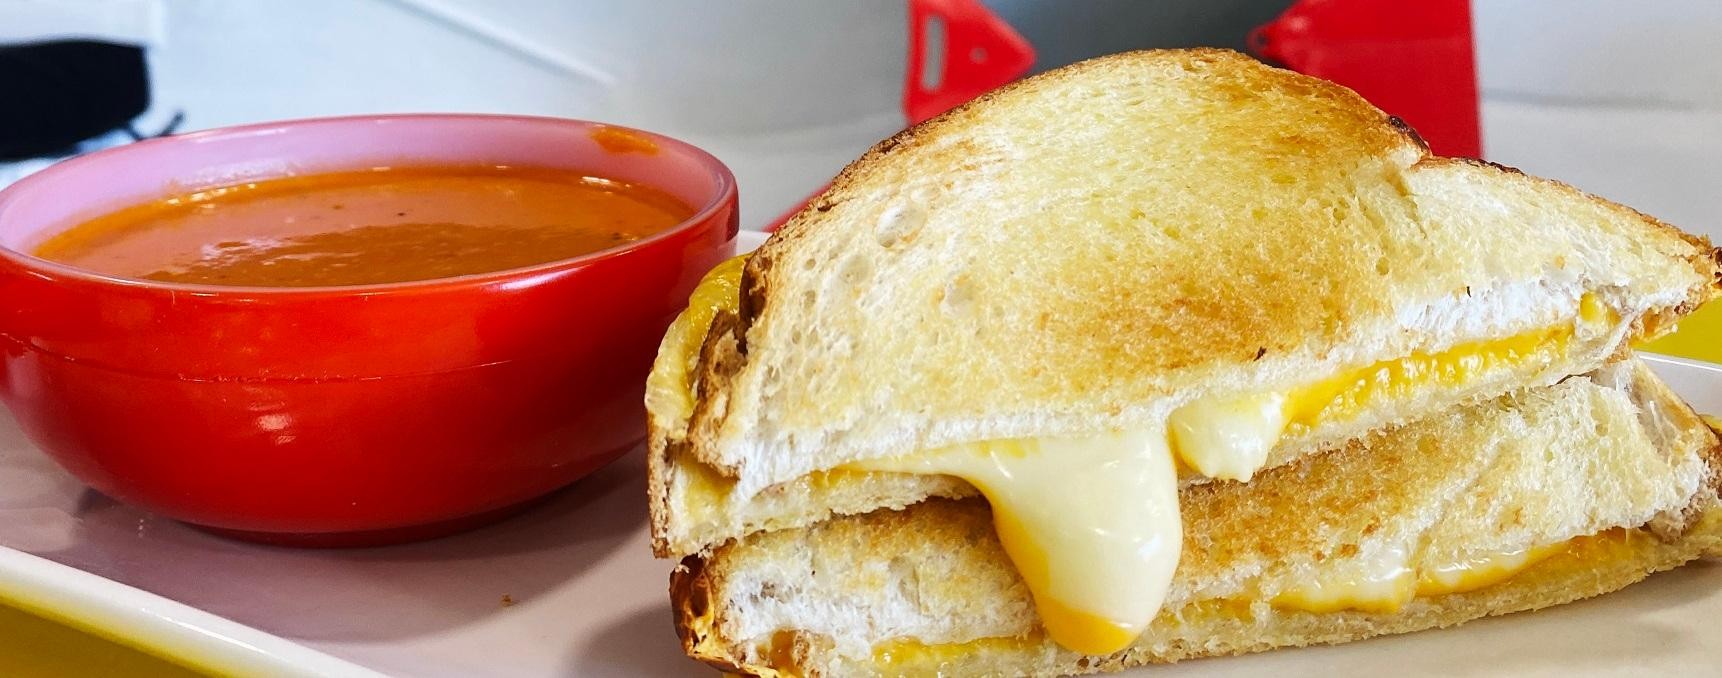 Tomato Basil Soup + Grilled Cheese Sandwich